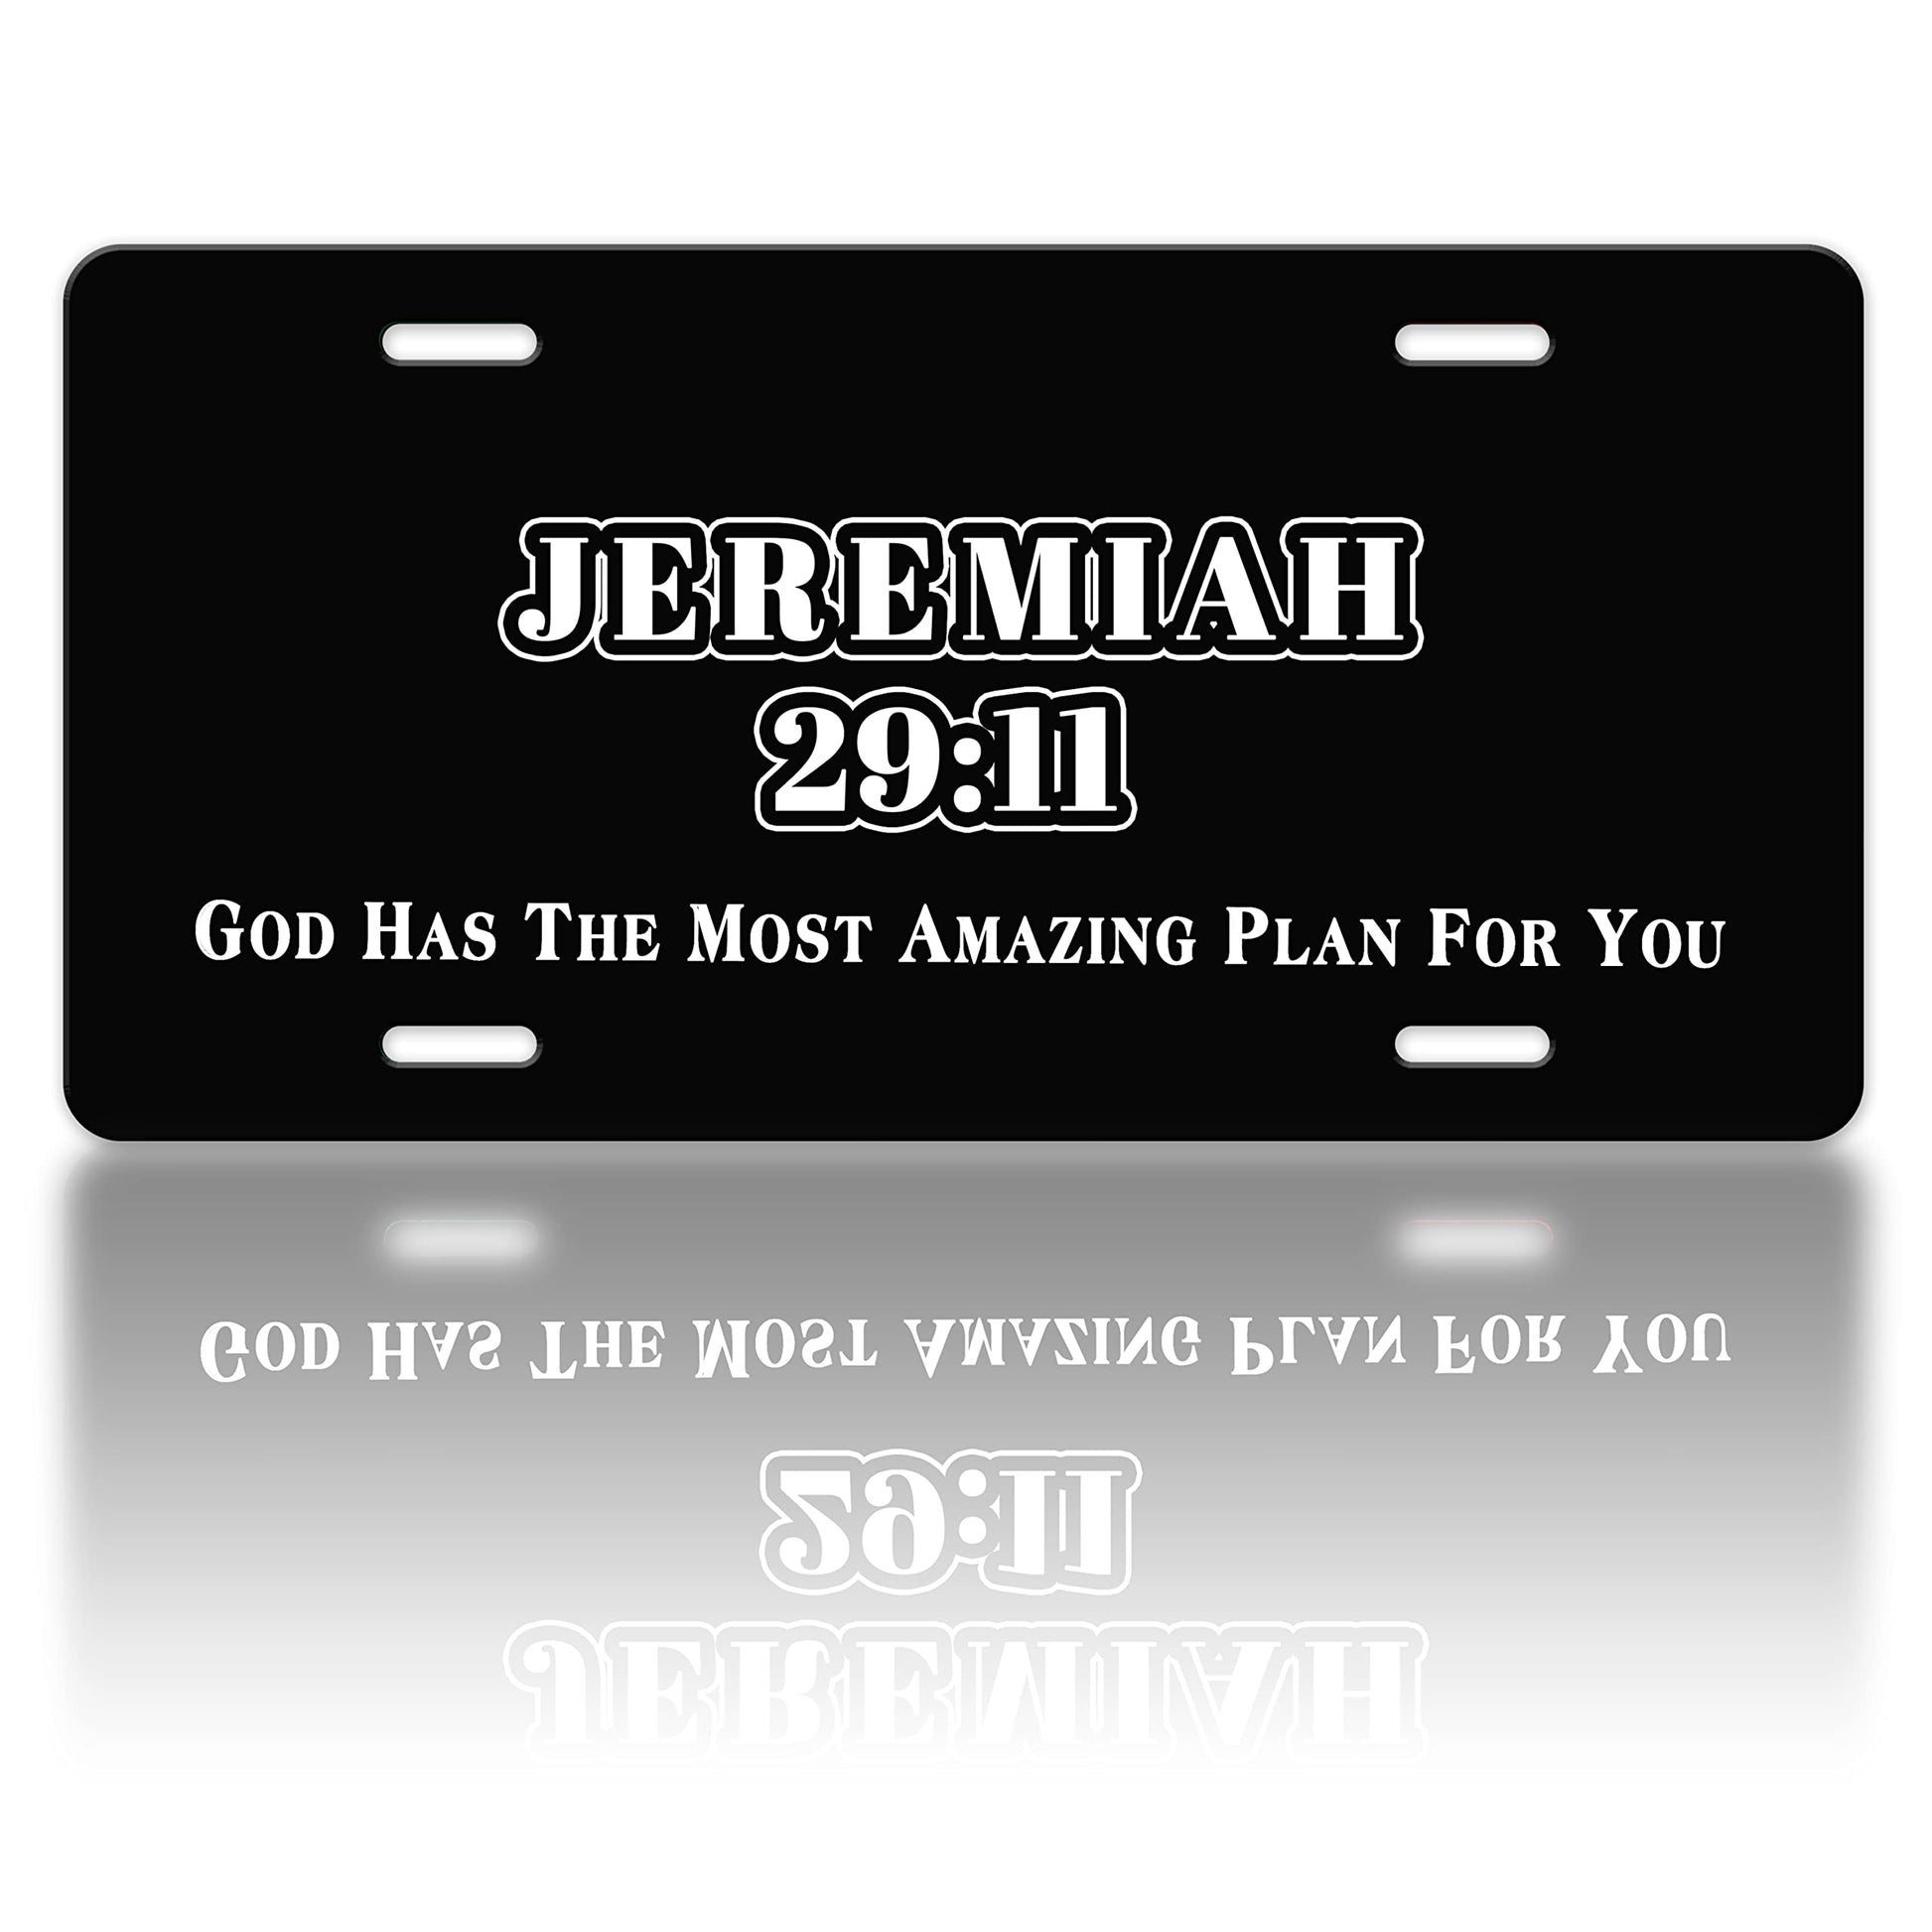 Jeremiah 29:11 God Has The Most Amazing Plan For You Christian Front License Plate 12x6 claimedbygoddesigns